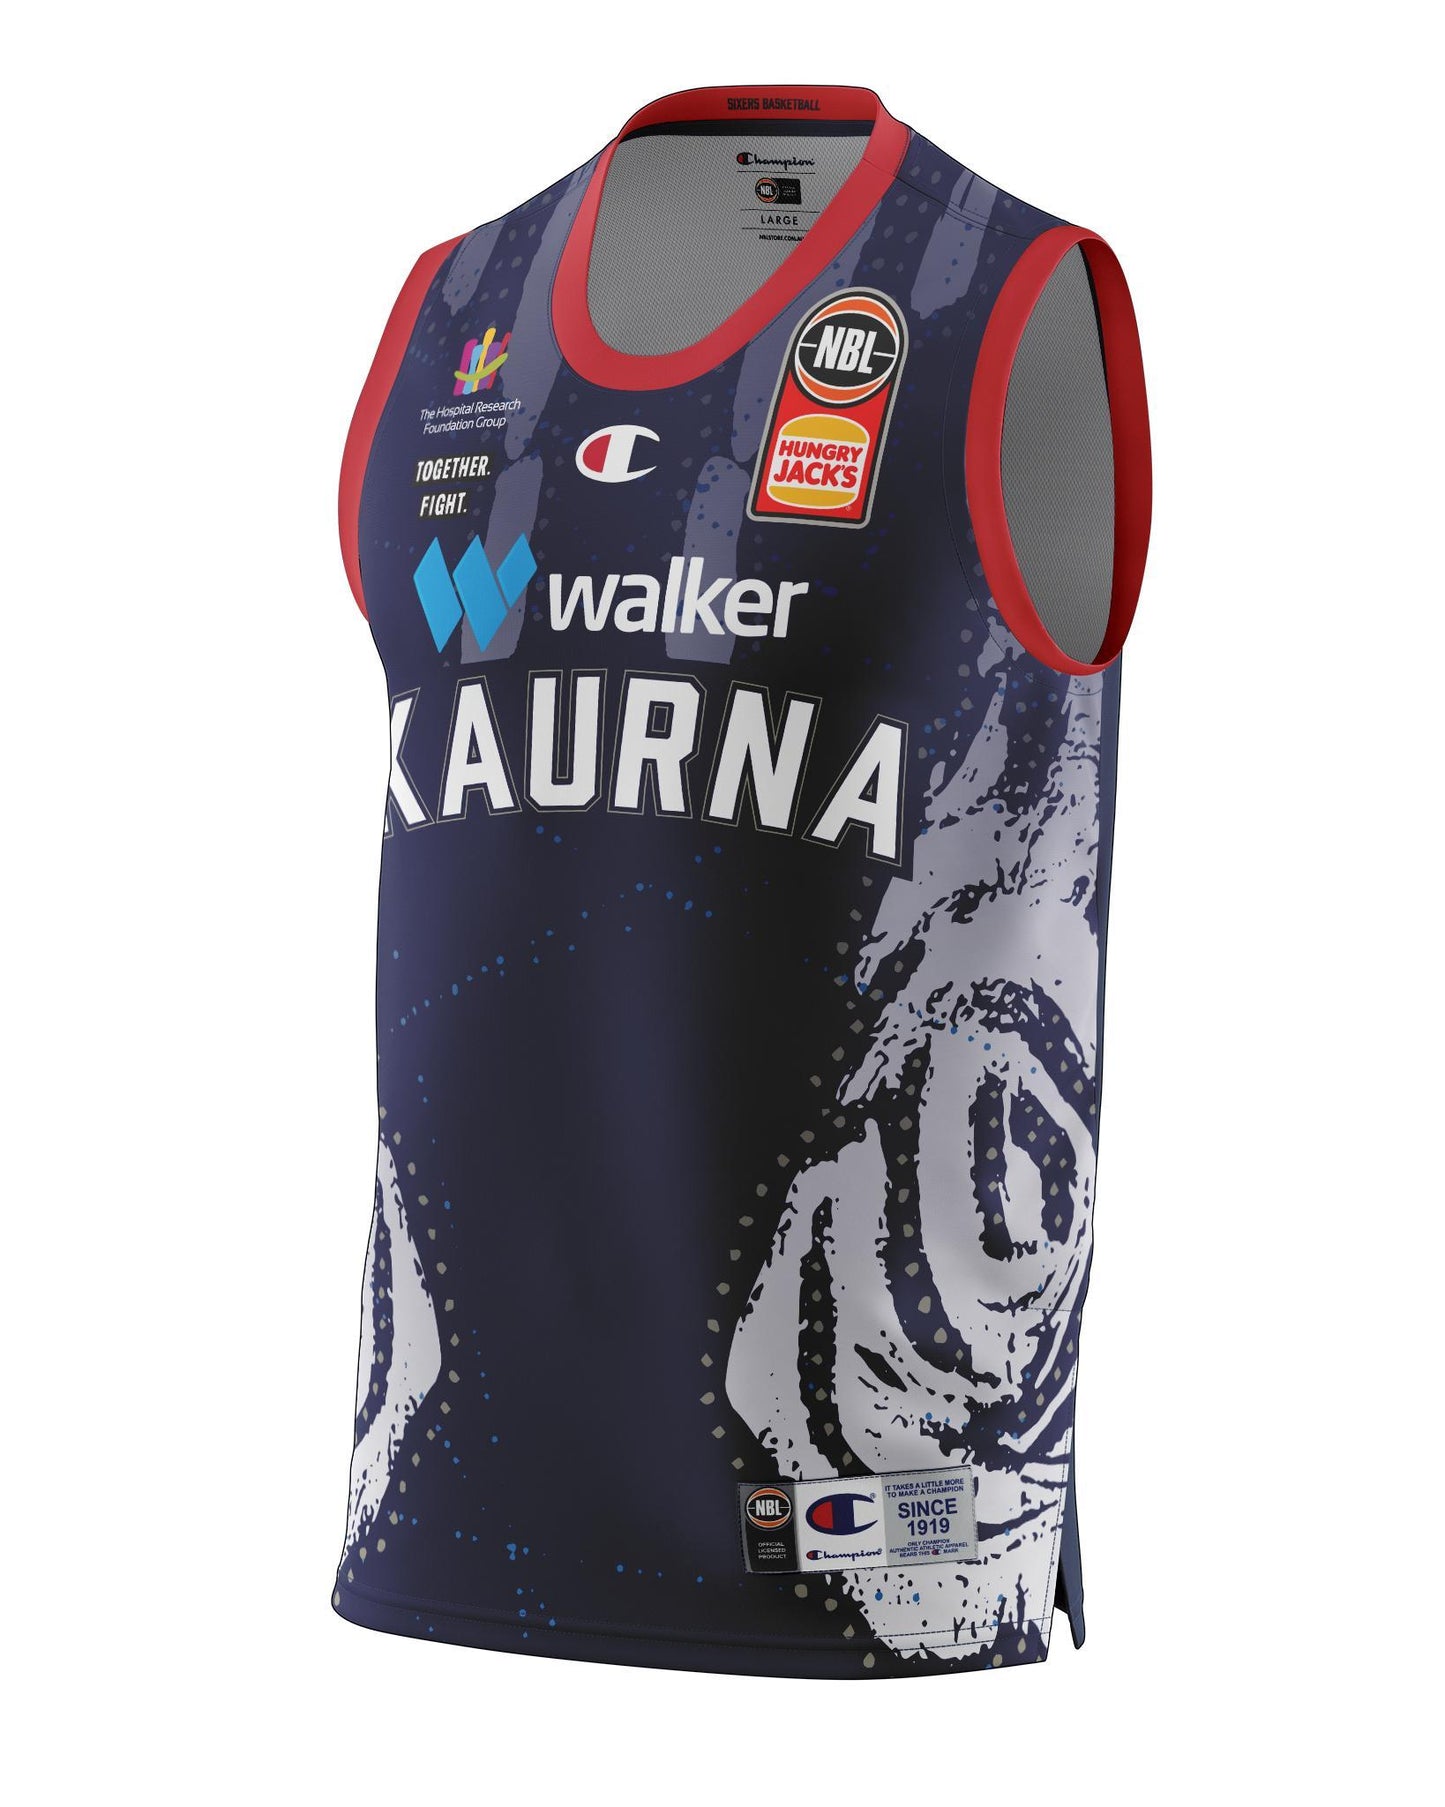 Adelaide 36ers 2021/22 Authentic Adult Indigenous Jersey